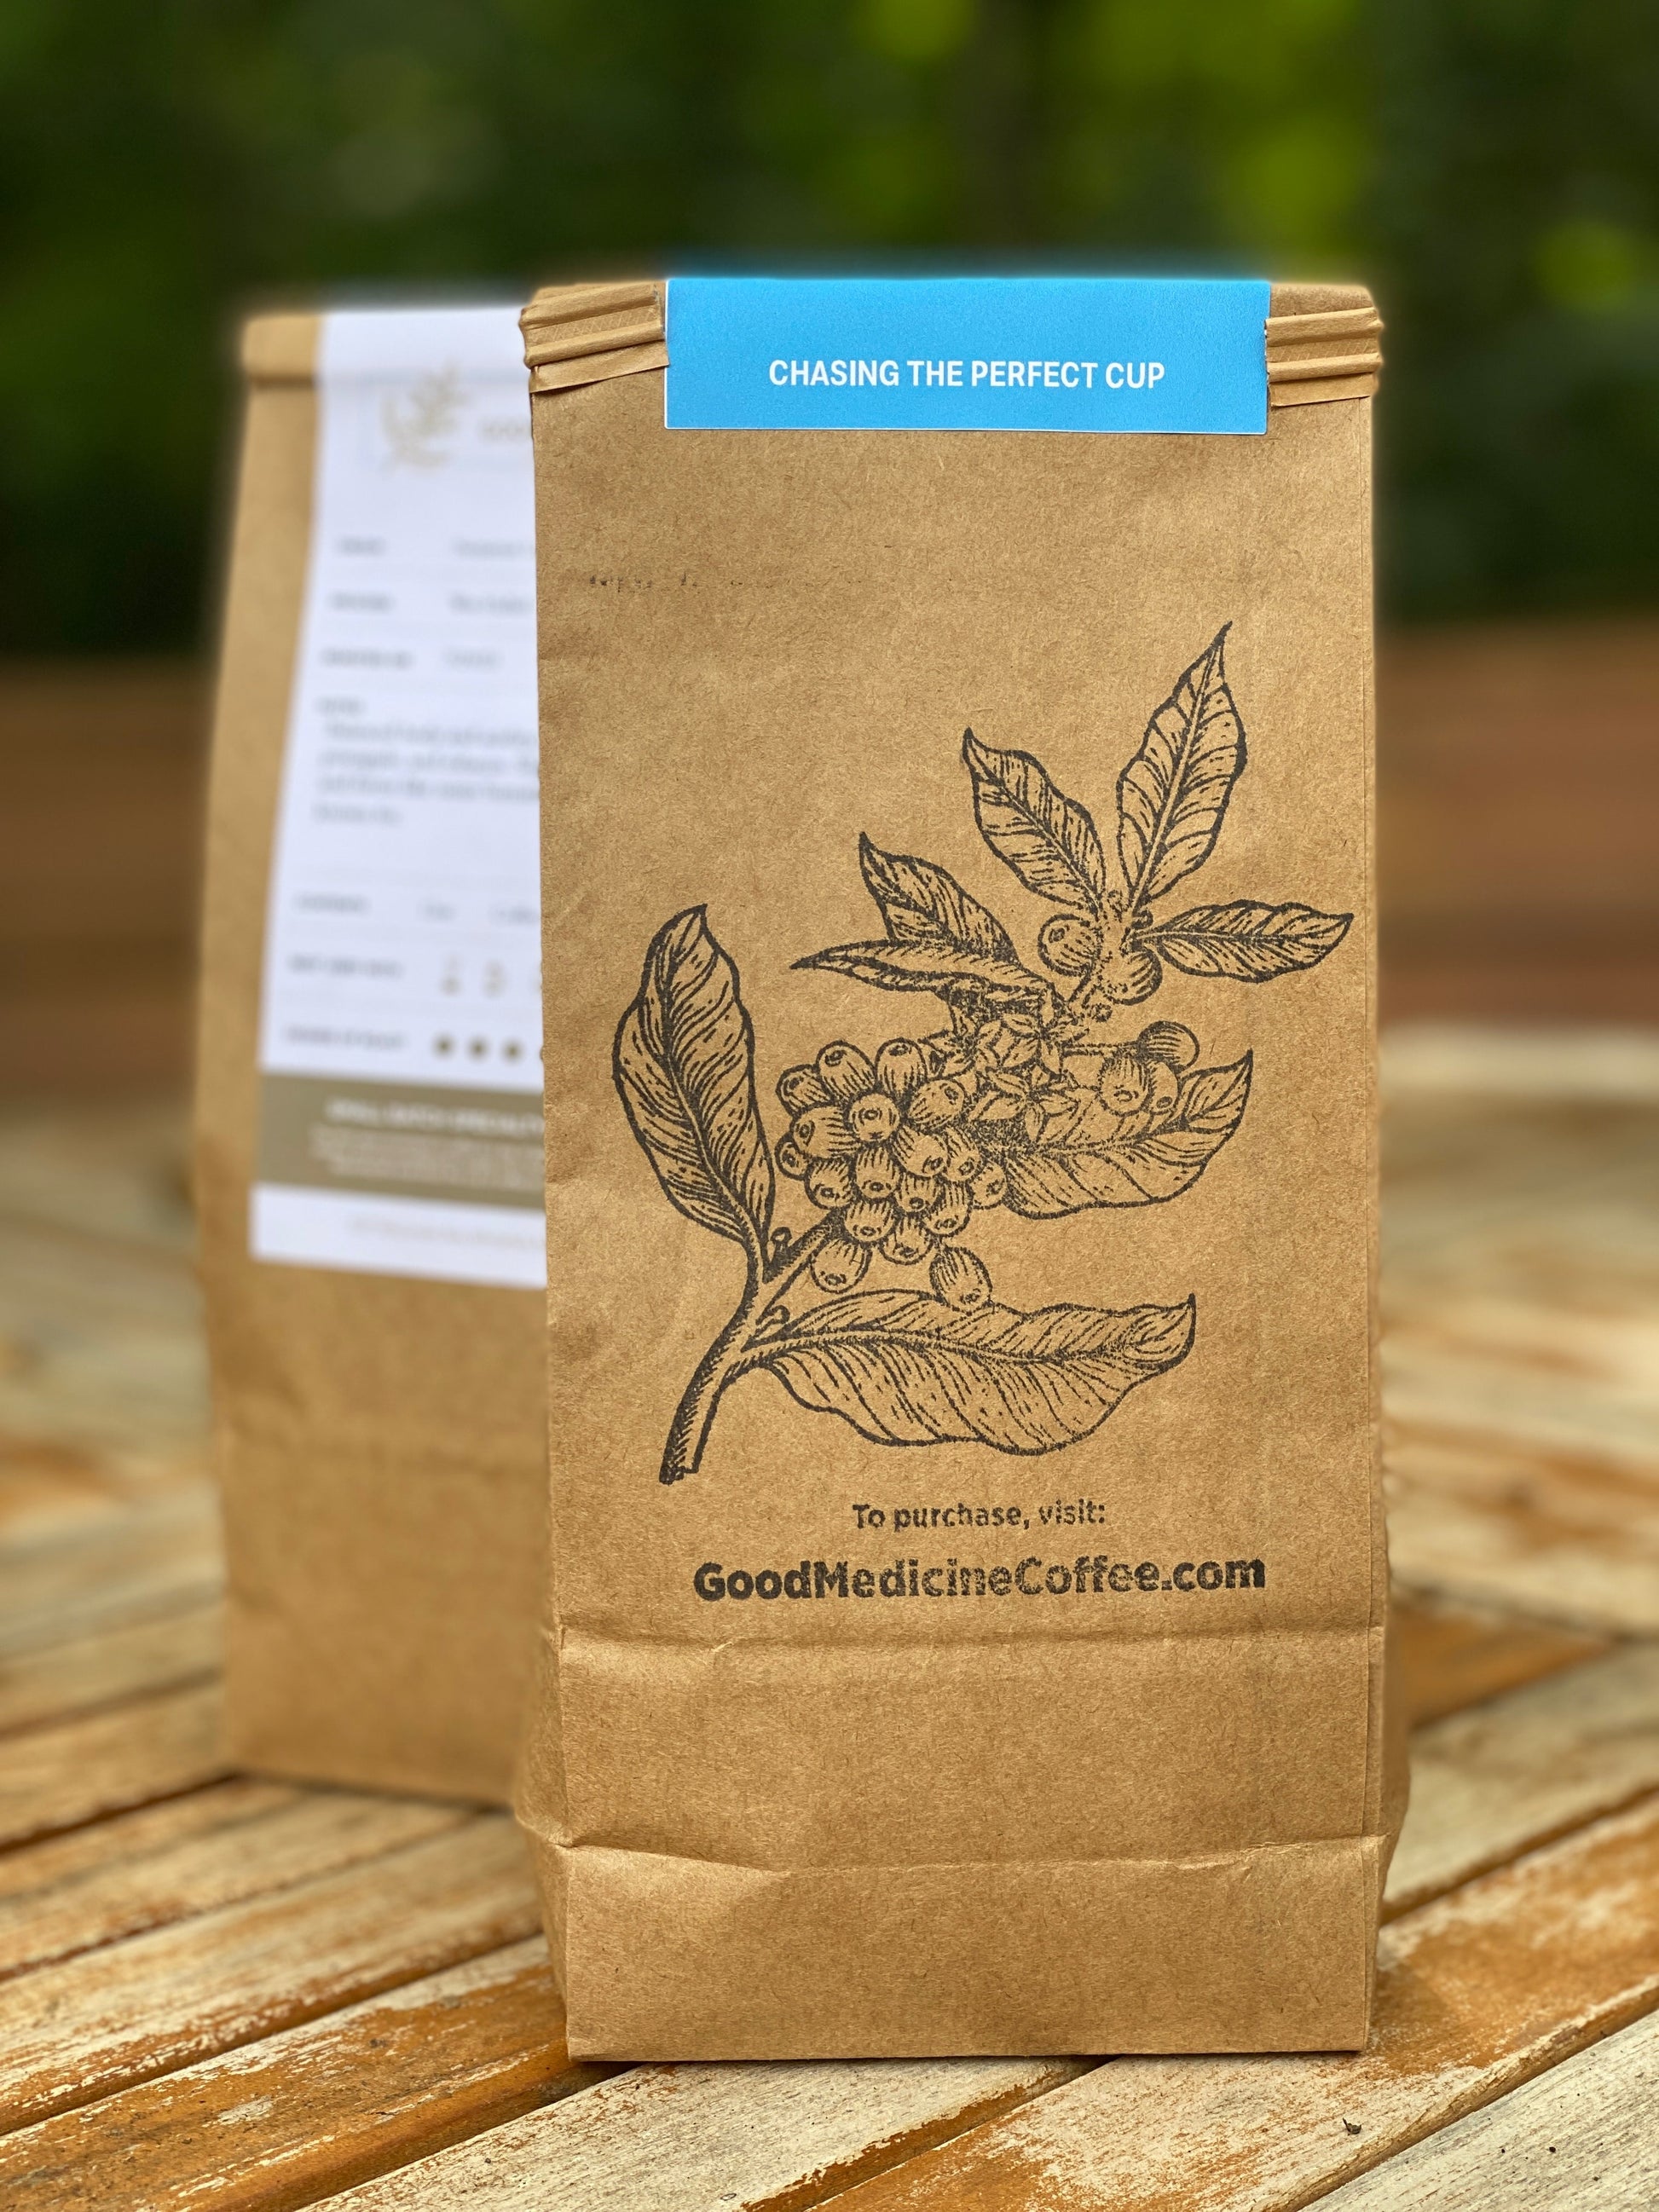 Receive Freshly Roasted Small Batch Coffee Bags Automatically Shipped To You 